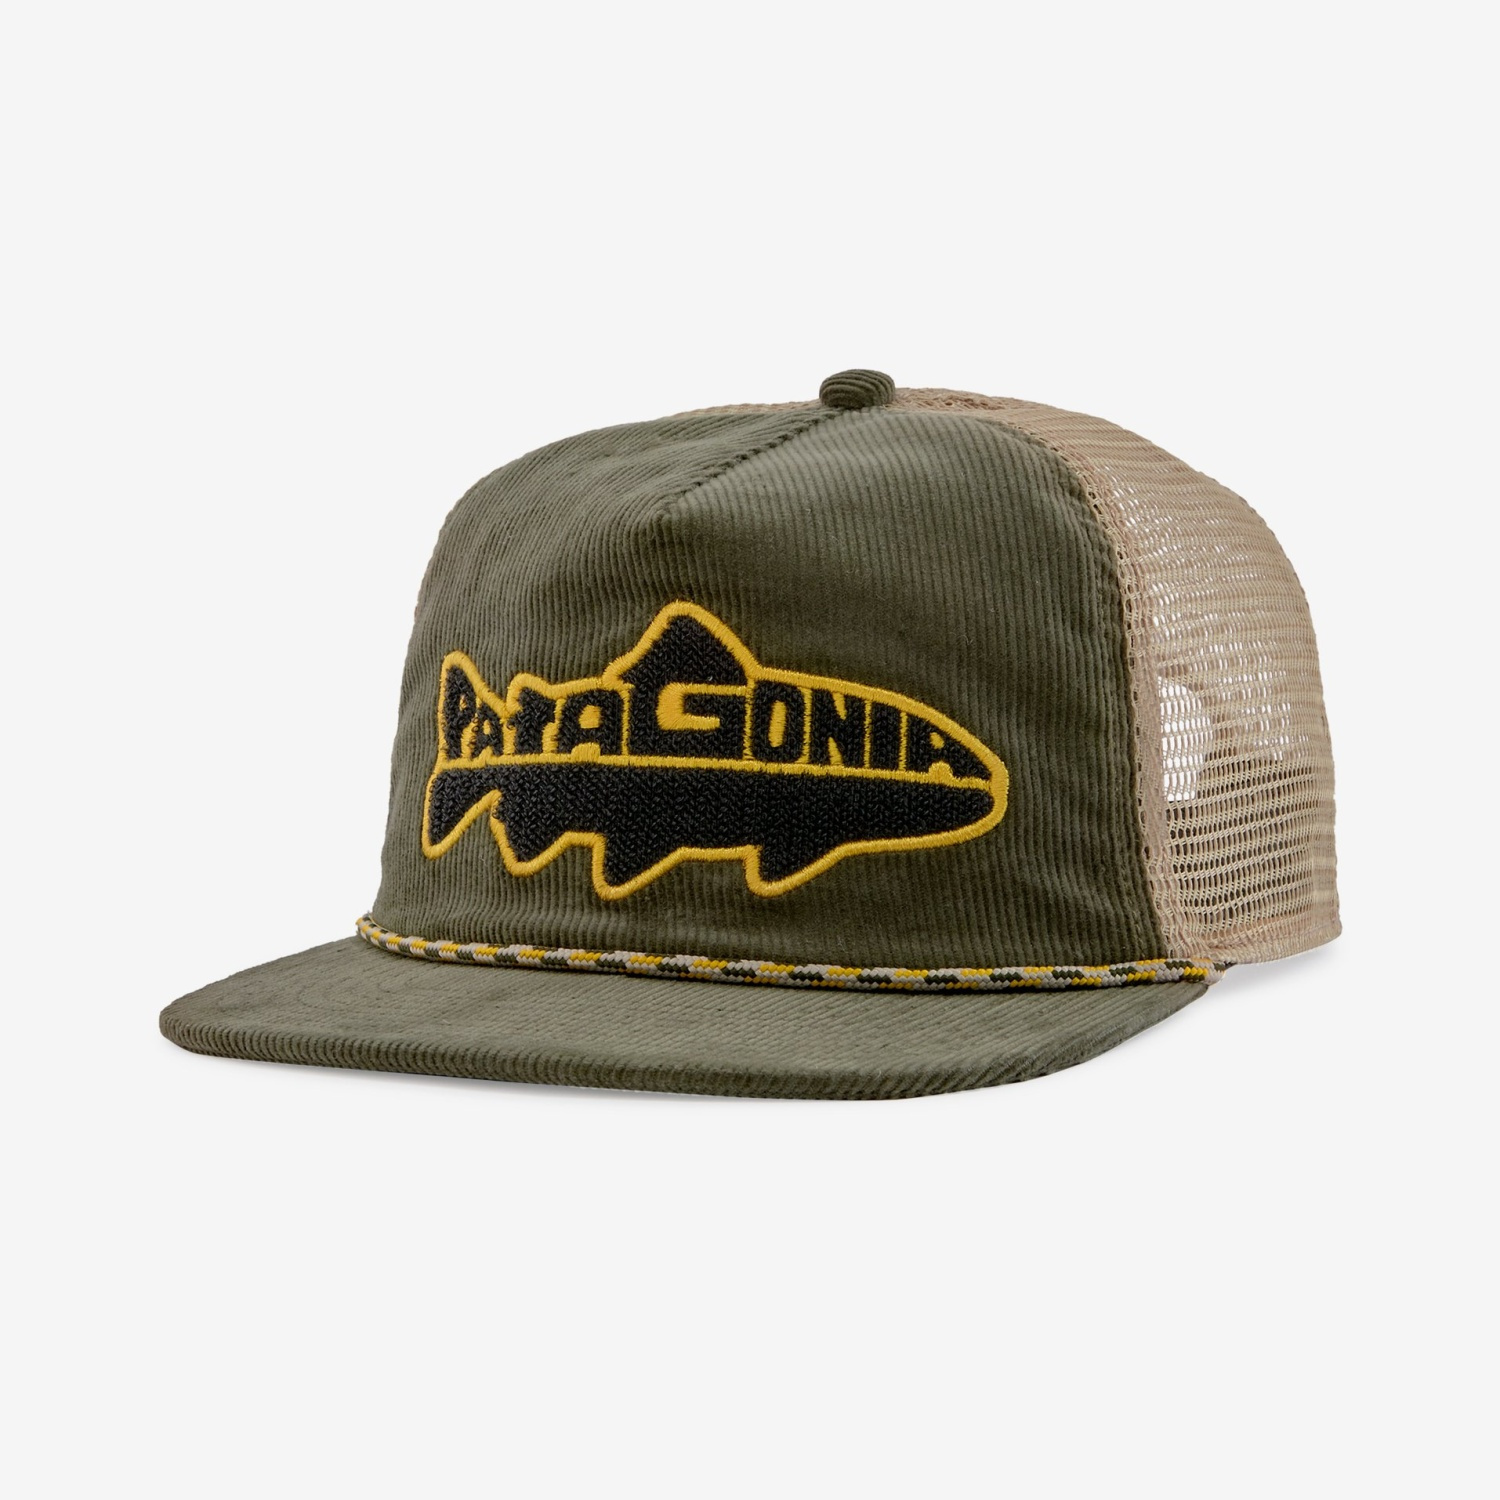 Patagonia Fly Catcher Hat WIGN ALL